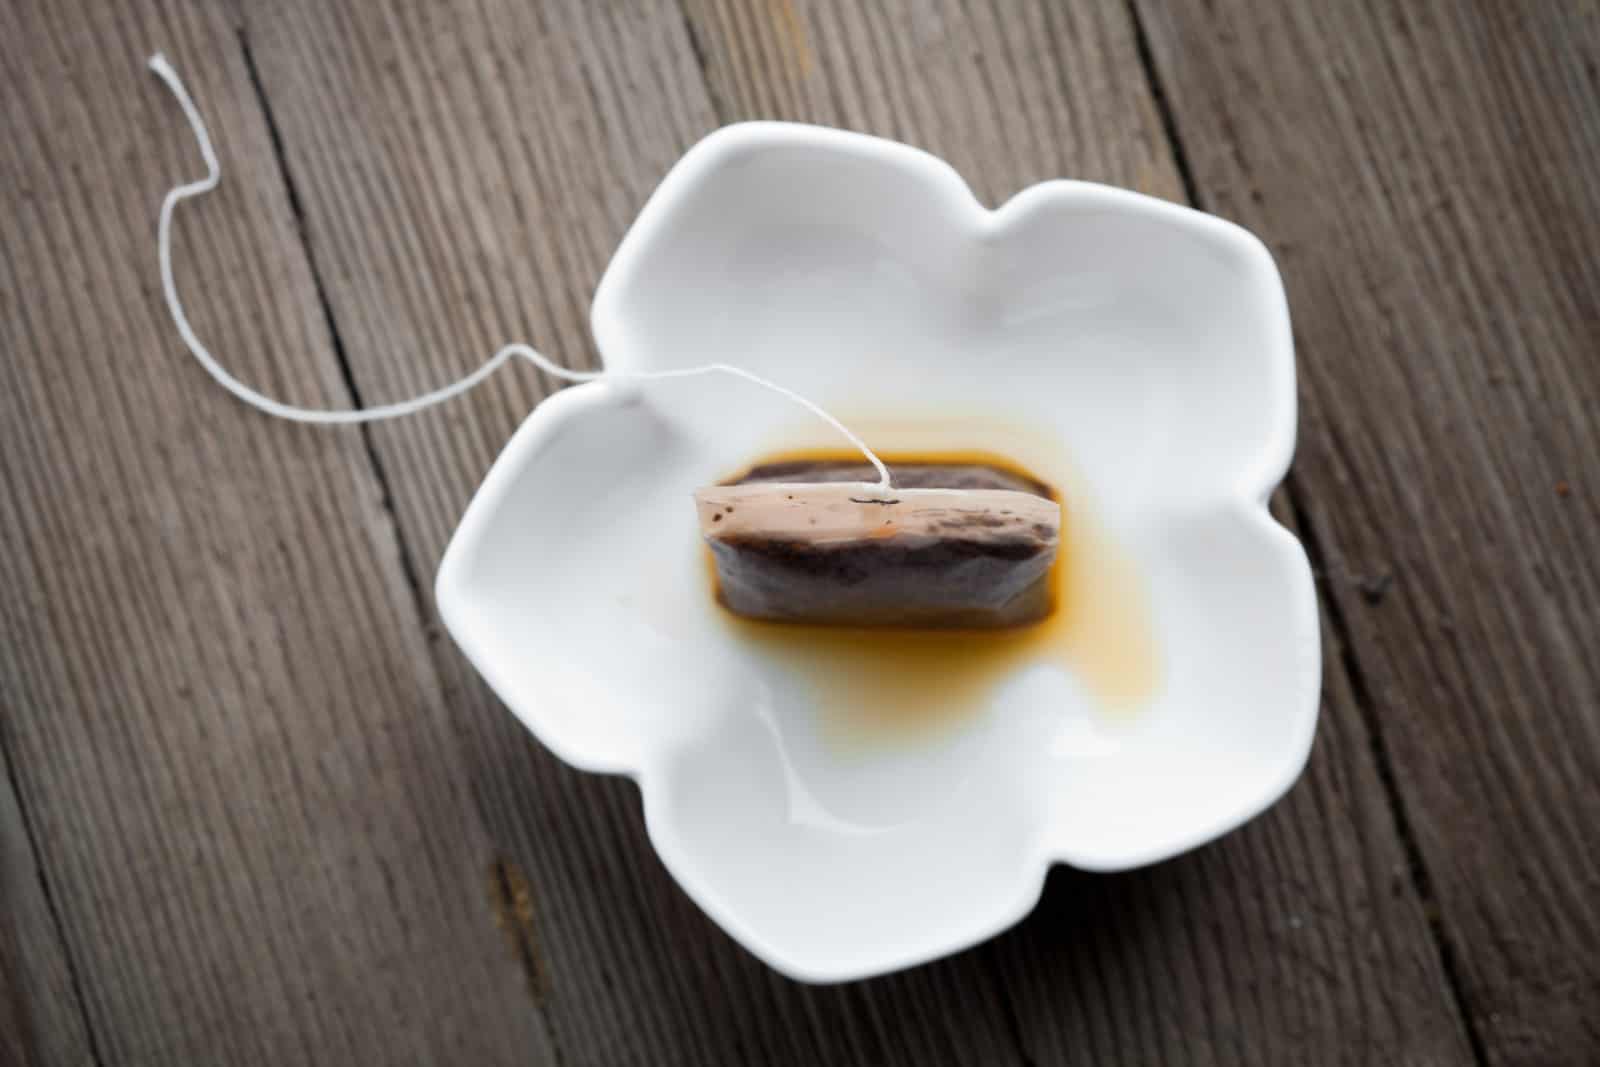 Used tea bag in small white bowl